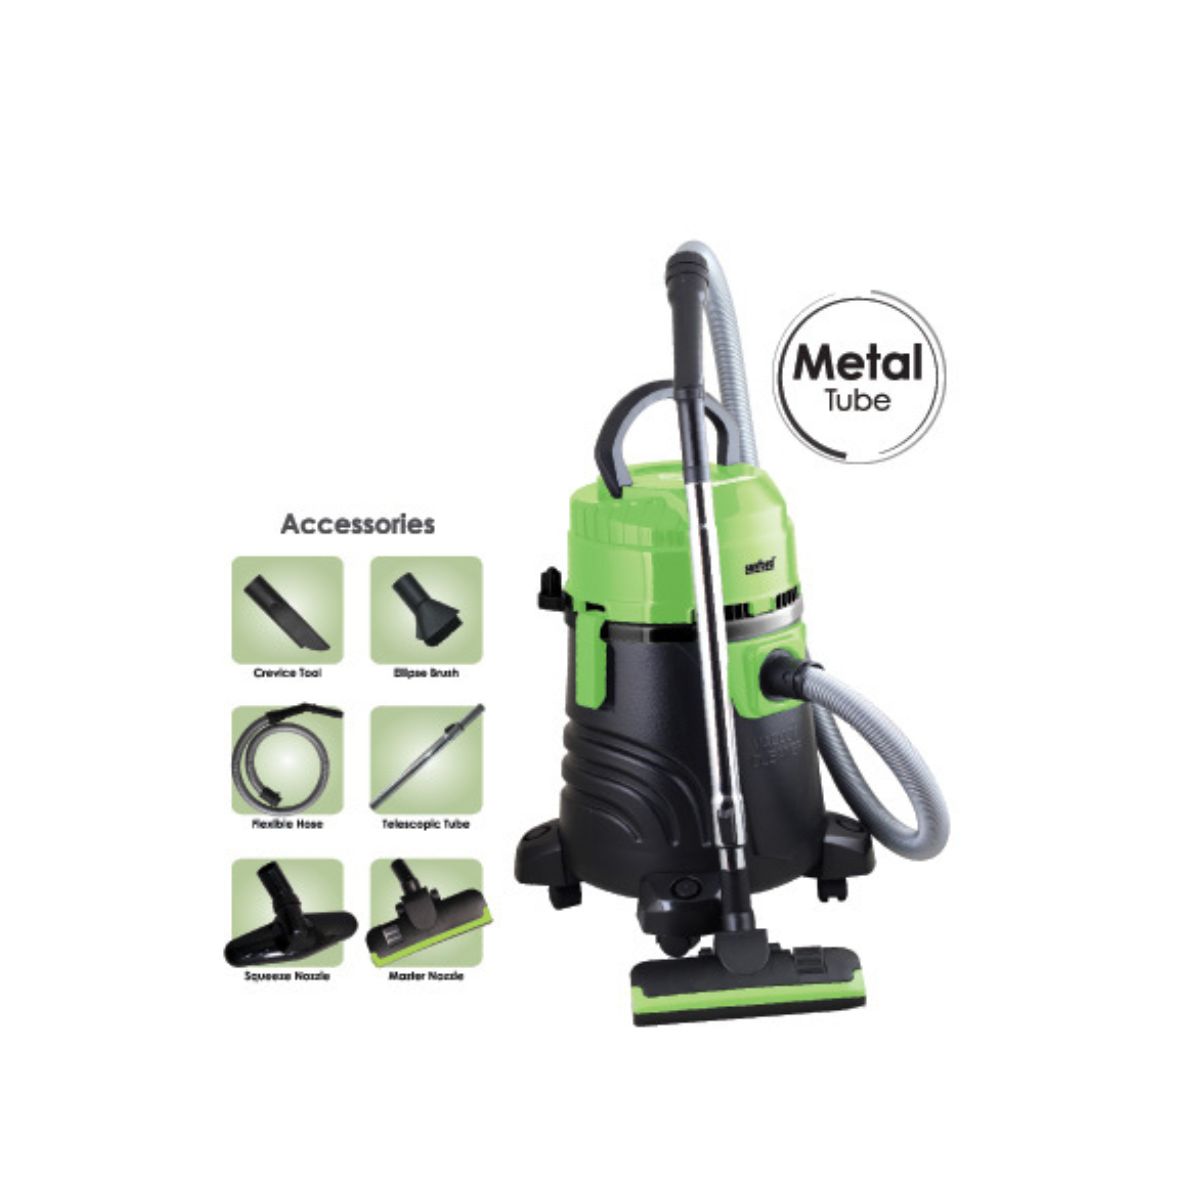 Sanford Vacuum Cleaner Wet And Dry - SF891VC - 32L - Green